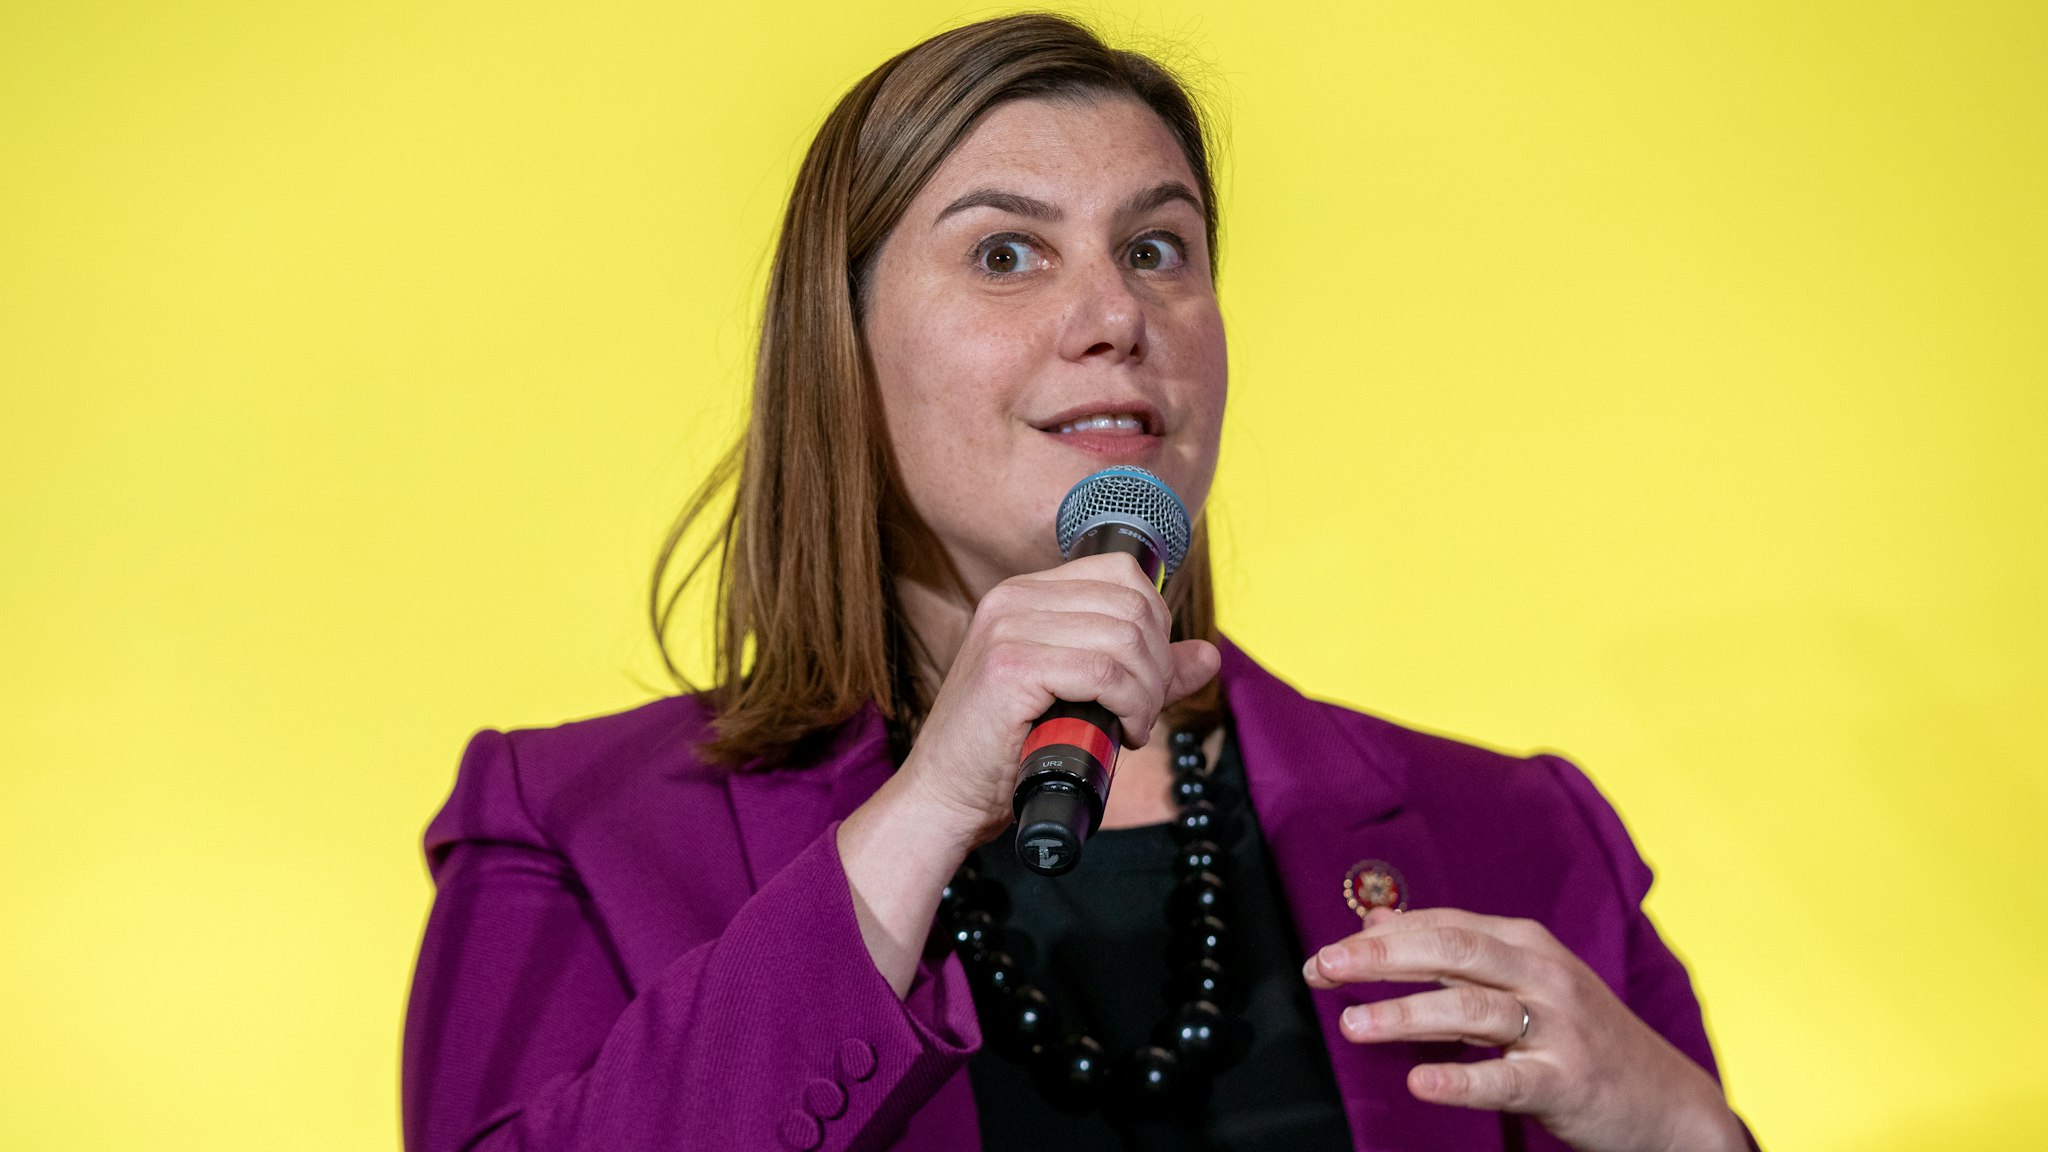 Representative Elissa Slotkin, a Democrat from Michigan, speaks during the DNC Women's Leadership Forum conference in Washington, D.C., U.S., on Thursday, Oct. 17, 2019. The WLF serves as the Democratic Party's centralized hub for activation, information, and fundraising for Democratic women and their allies.